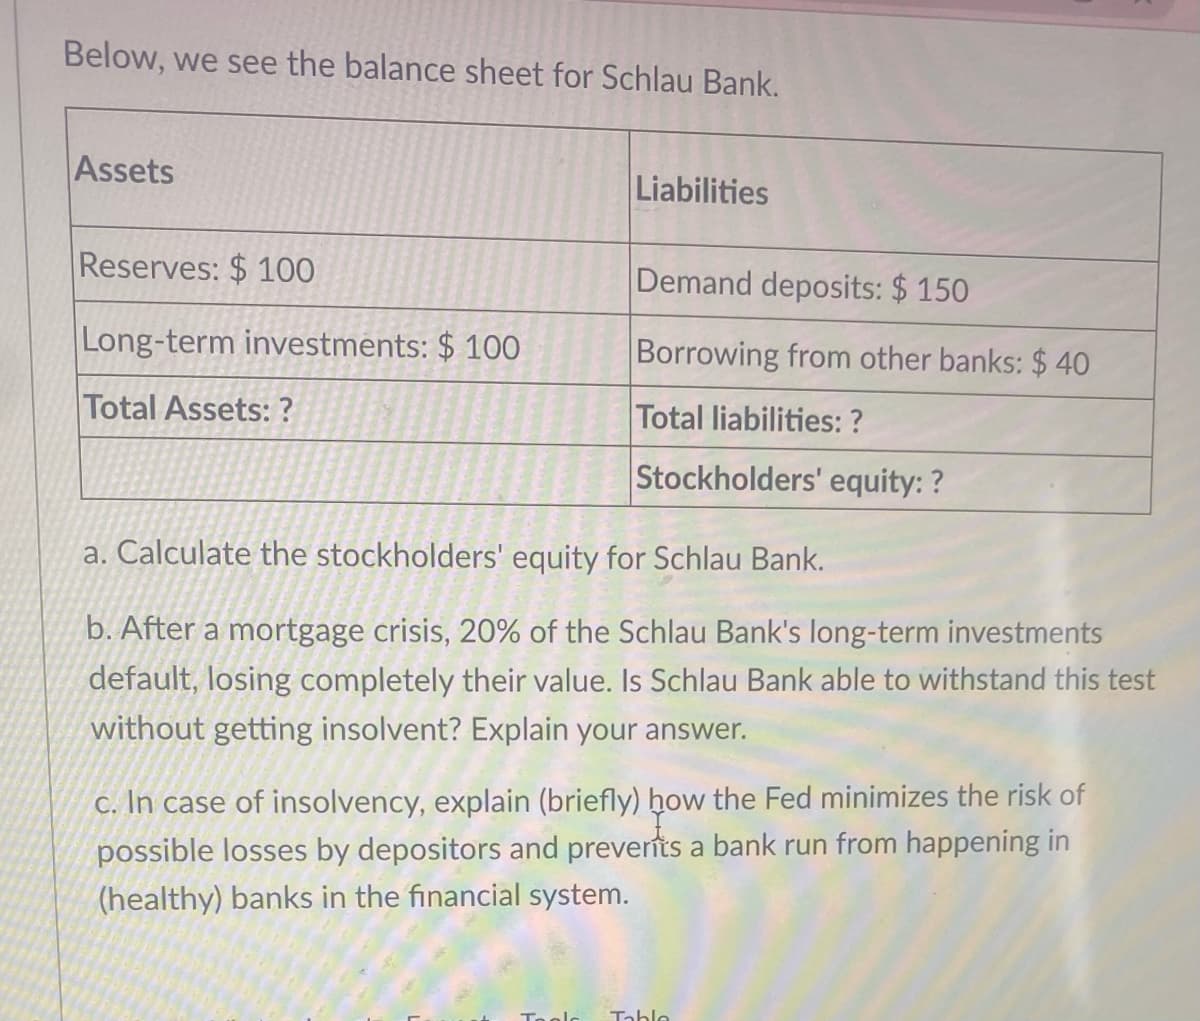 Below, we see the balance sheet for Schlau Bank.
Assets
Reserves: $ 100
Long-term investments: $ 100
Total Assets: ?
Liabilities
Demand deposits: $ 150
Borrowing from other banks: $40
Total liabilities: ?
Stockholders' equity: ?
a. Calculate the stockholders' equity for Schlau Bank.
b. After a mortgage crisis, 20% of the Schlau Bank's long-term investments
default, losing completely their value. Is Schlau Bank able to withstand this test
without getting insolvent? Explain your answer.
c. In case of insolvency, explain (briefly) how the Fed minimizes the risk of
possible losses by depositors and preverits a bank run from happening in
(healthy) banks in the financial system.
Table